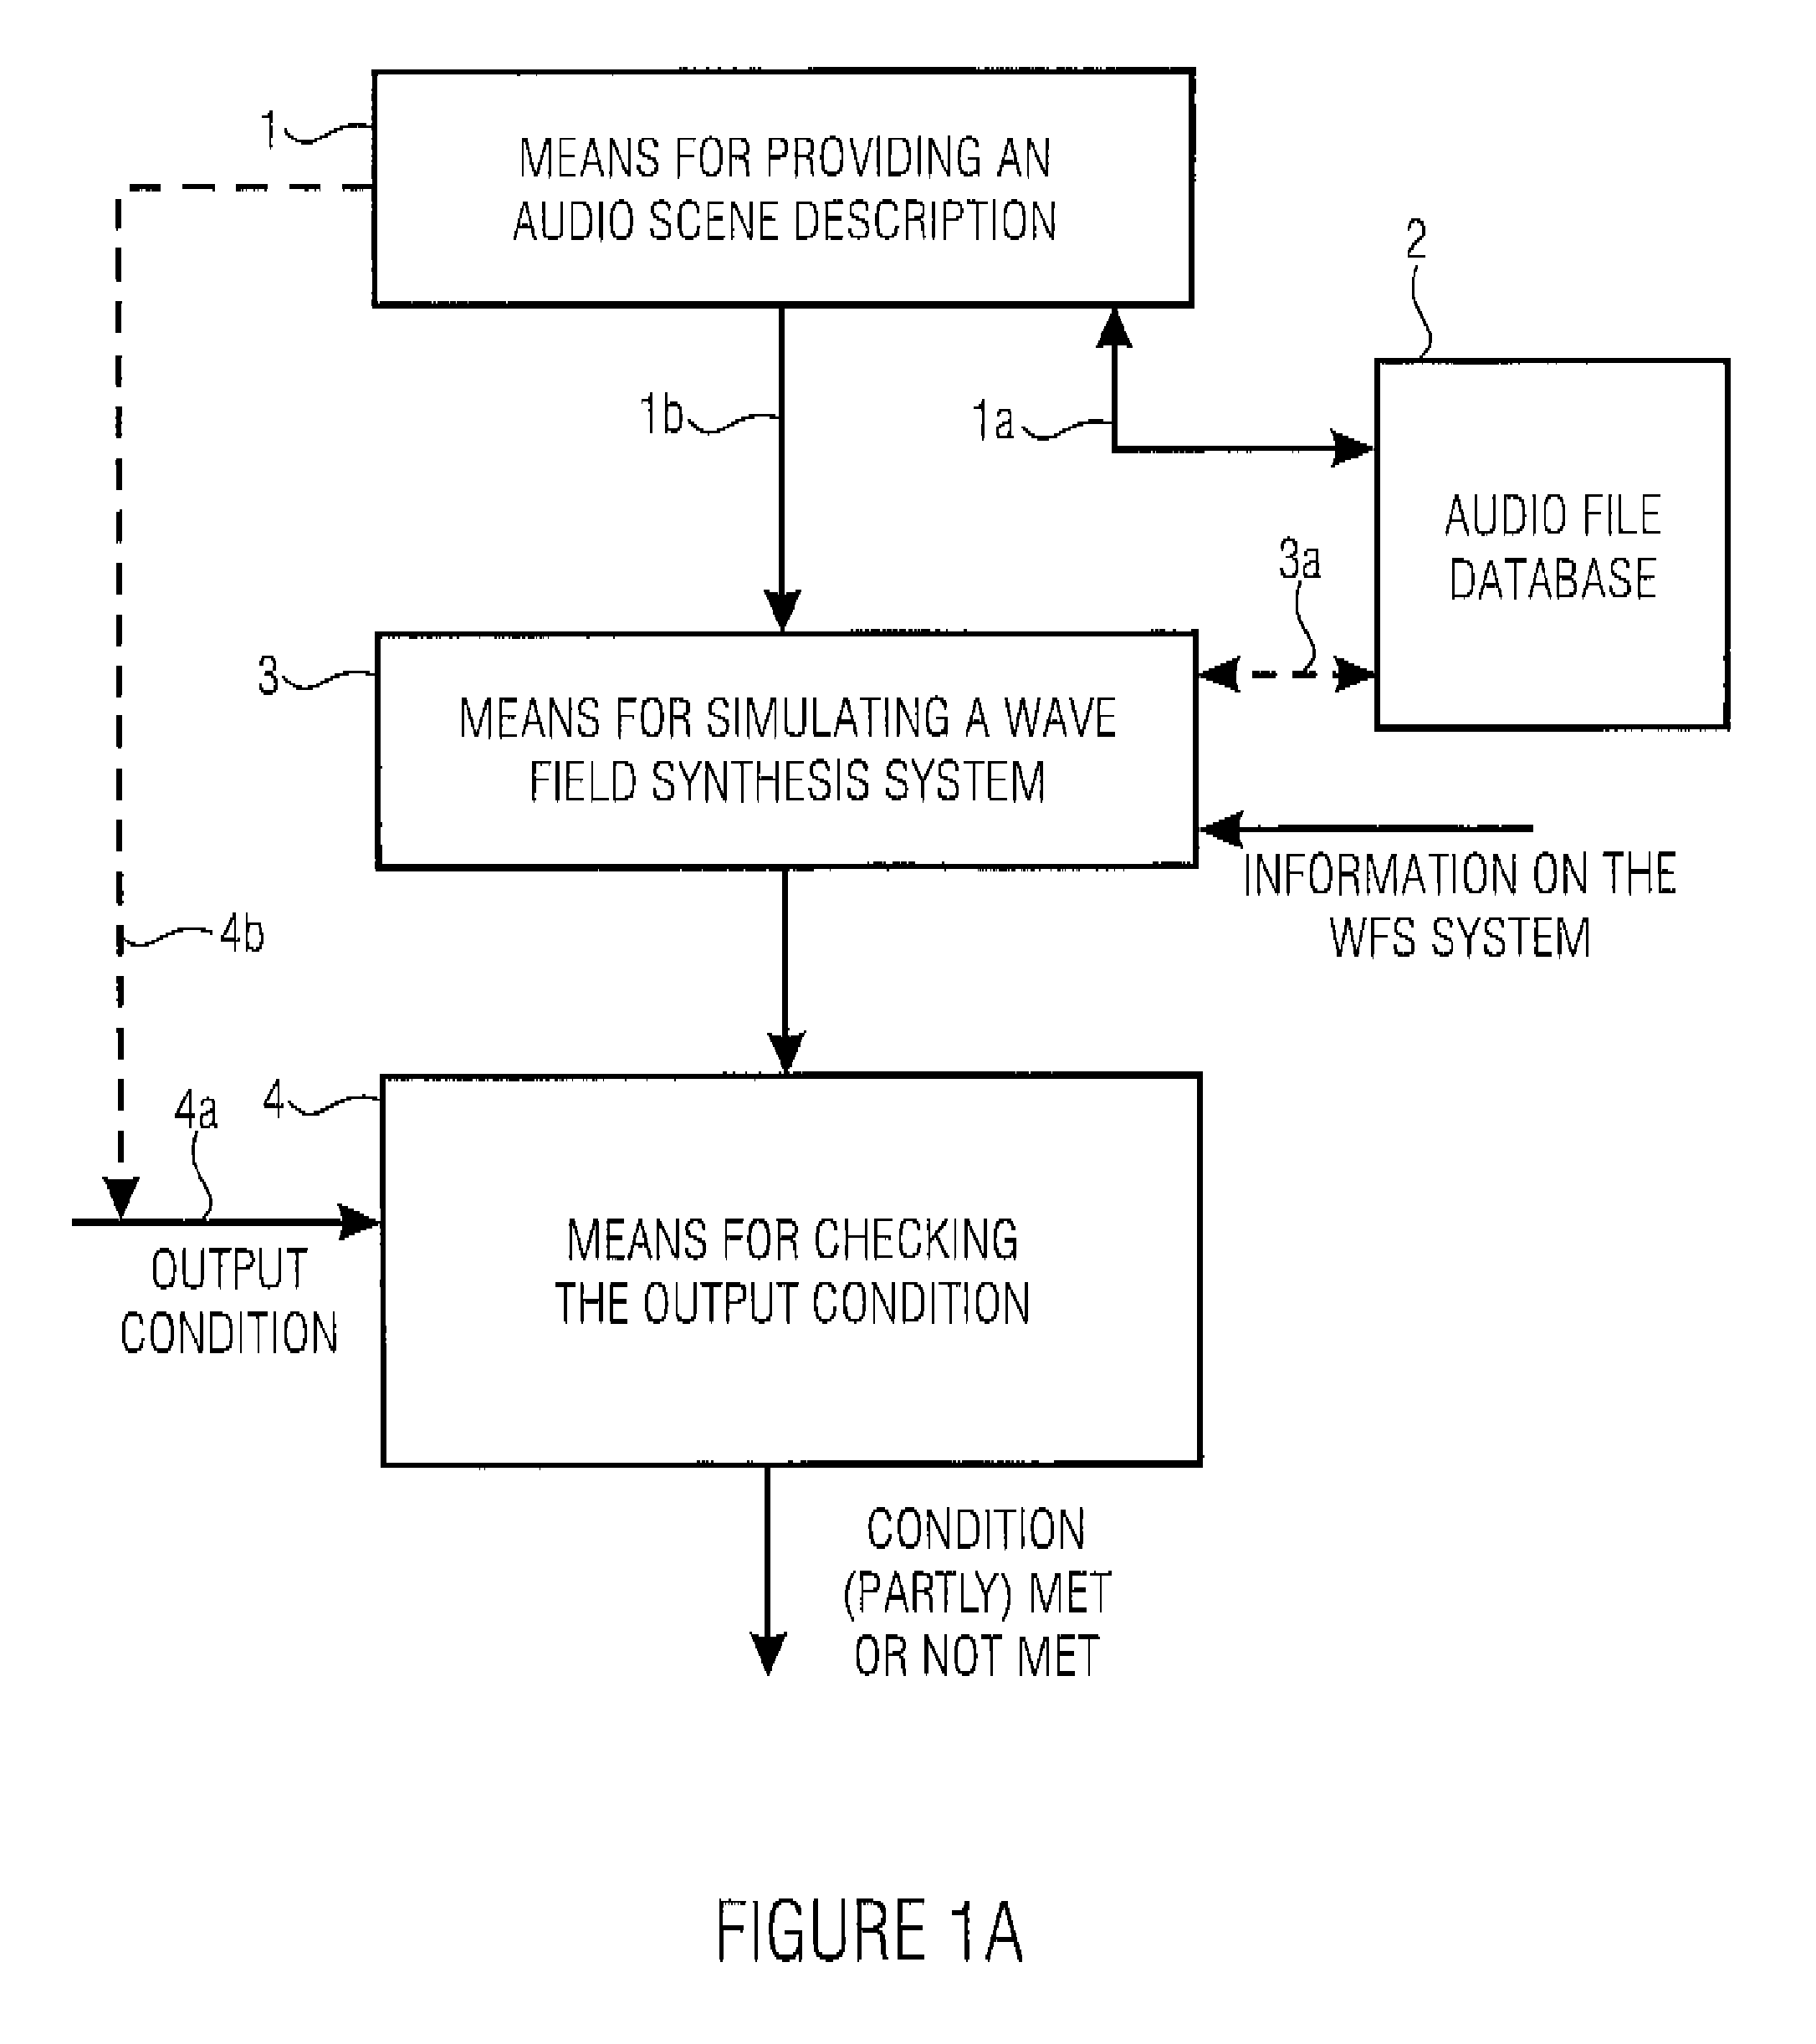 Apparatus and method for simulating a wave field synthesis system